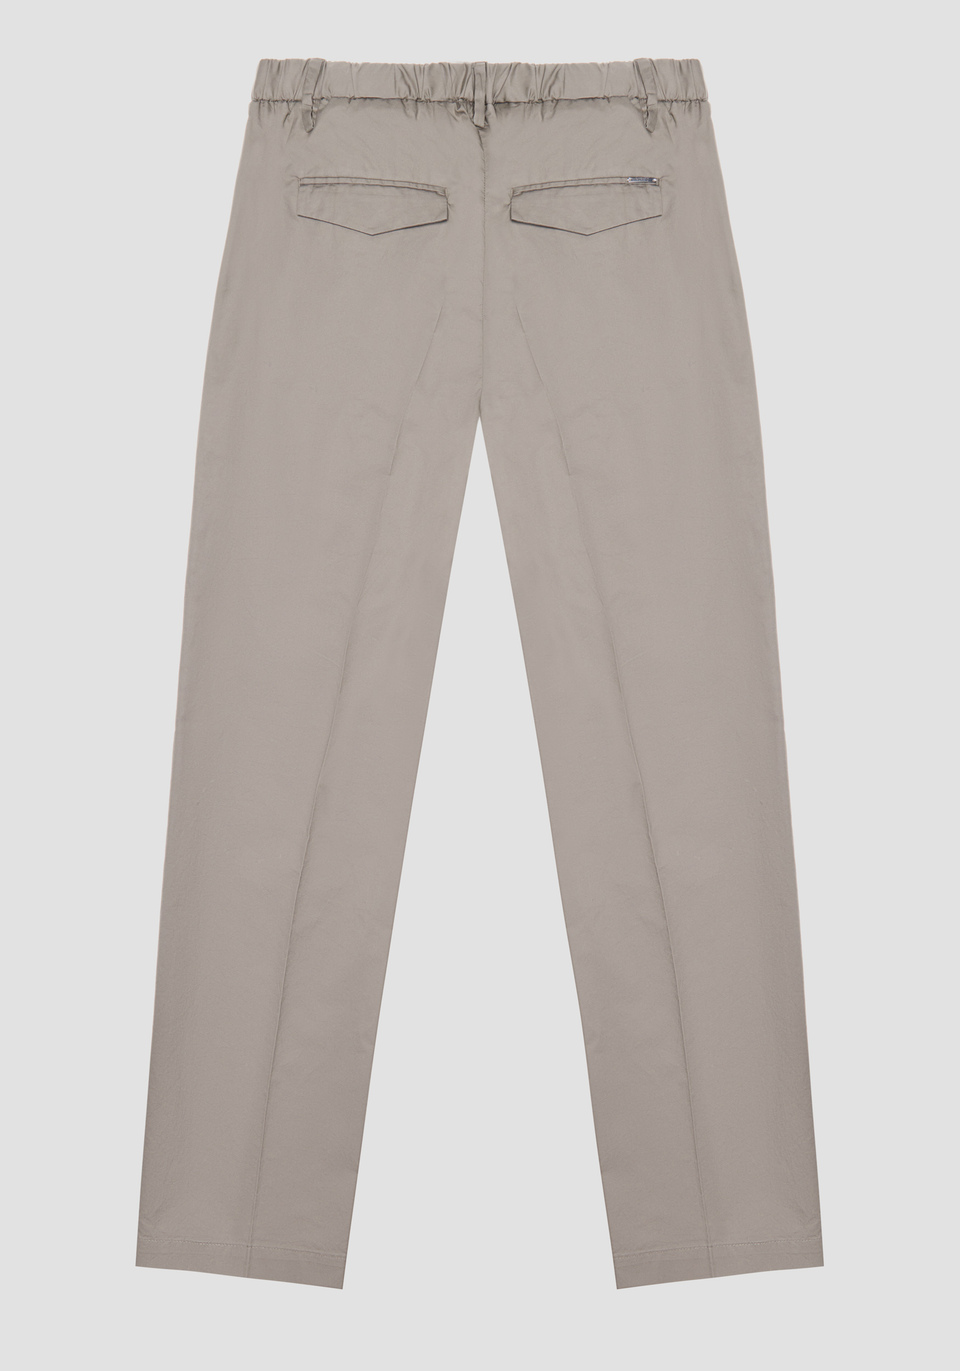 "KEVIN" CARROT-FIT TROUSERS IN COTTON TWILL - Antony Morato Online Shop